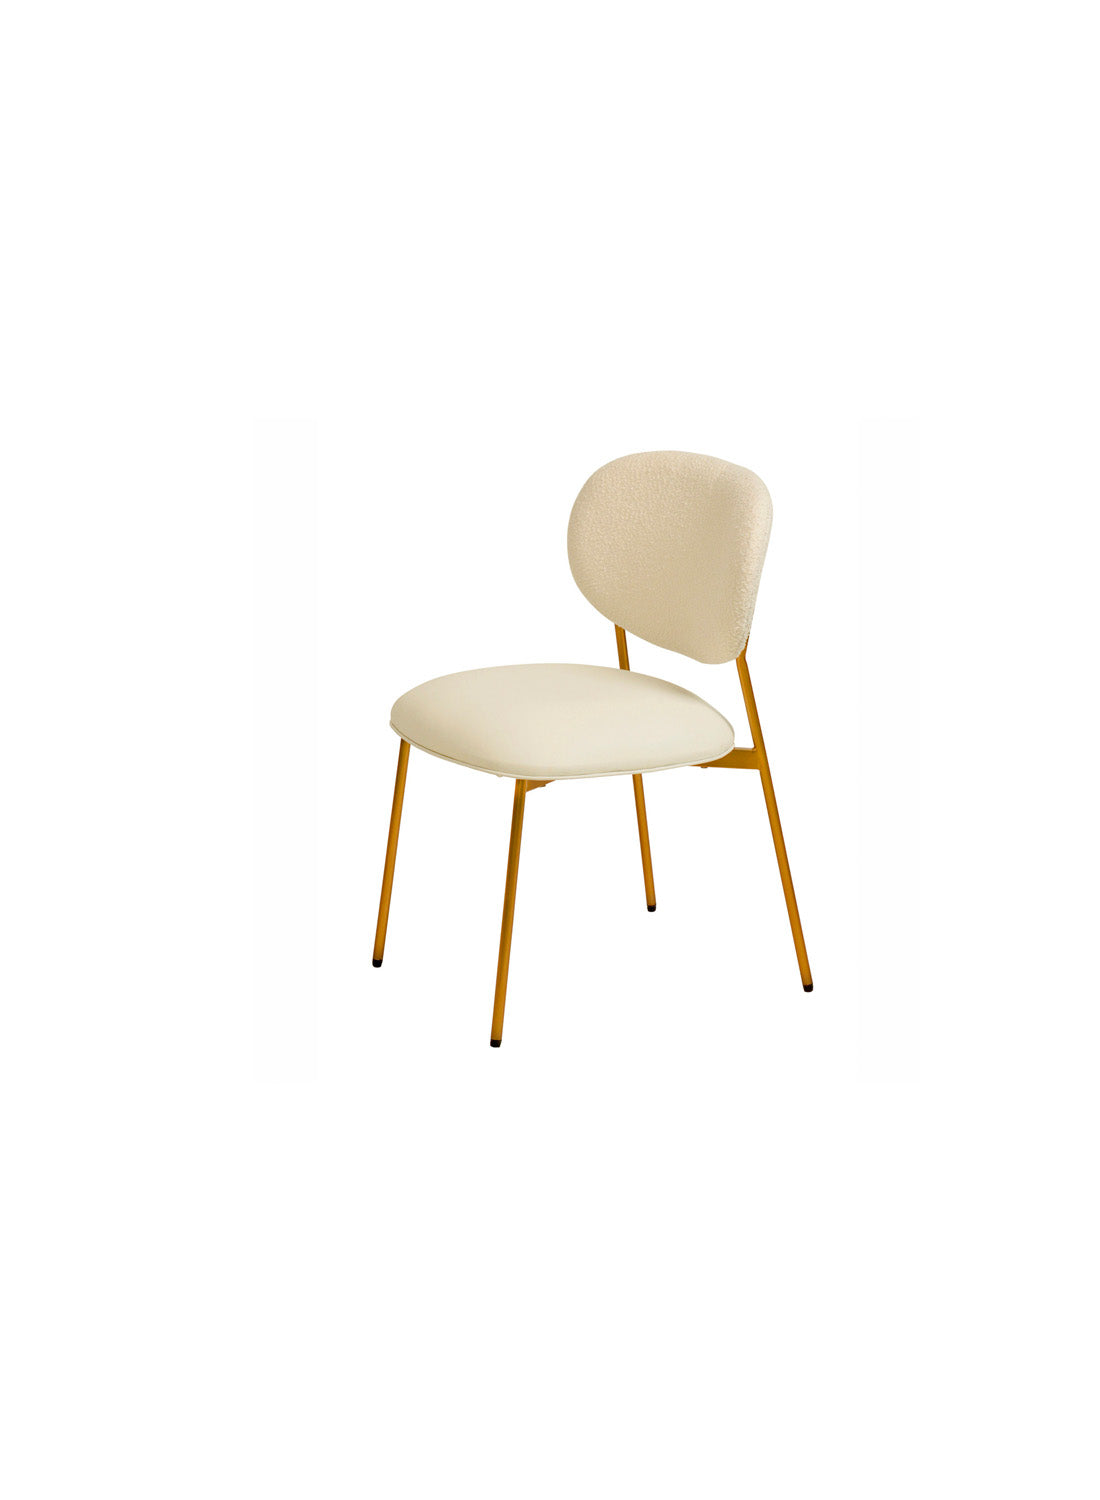 Grayson Boucle Dining Chair Set of 2, Cream